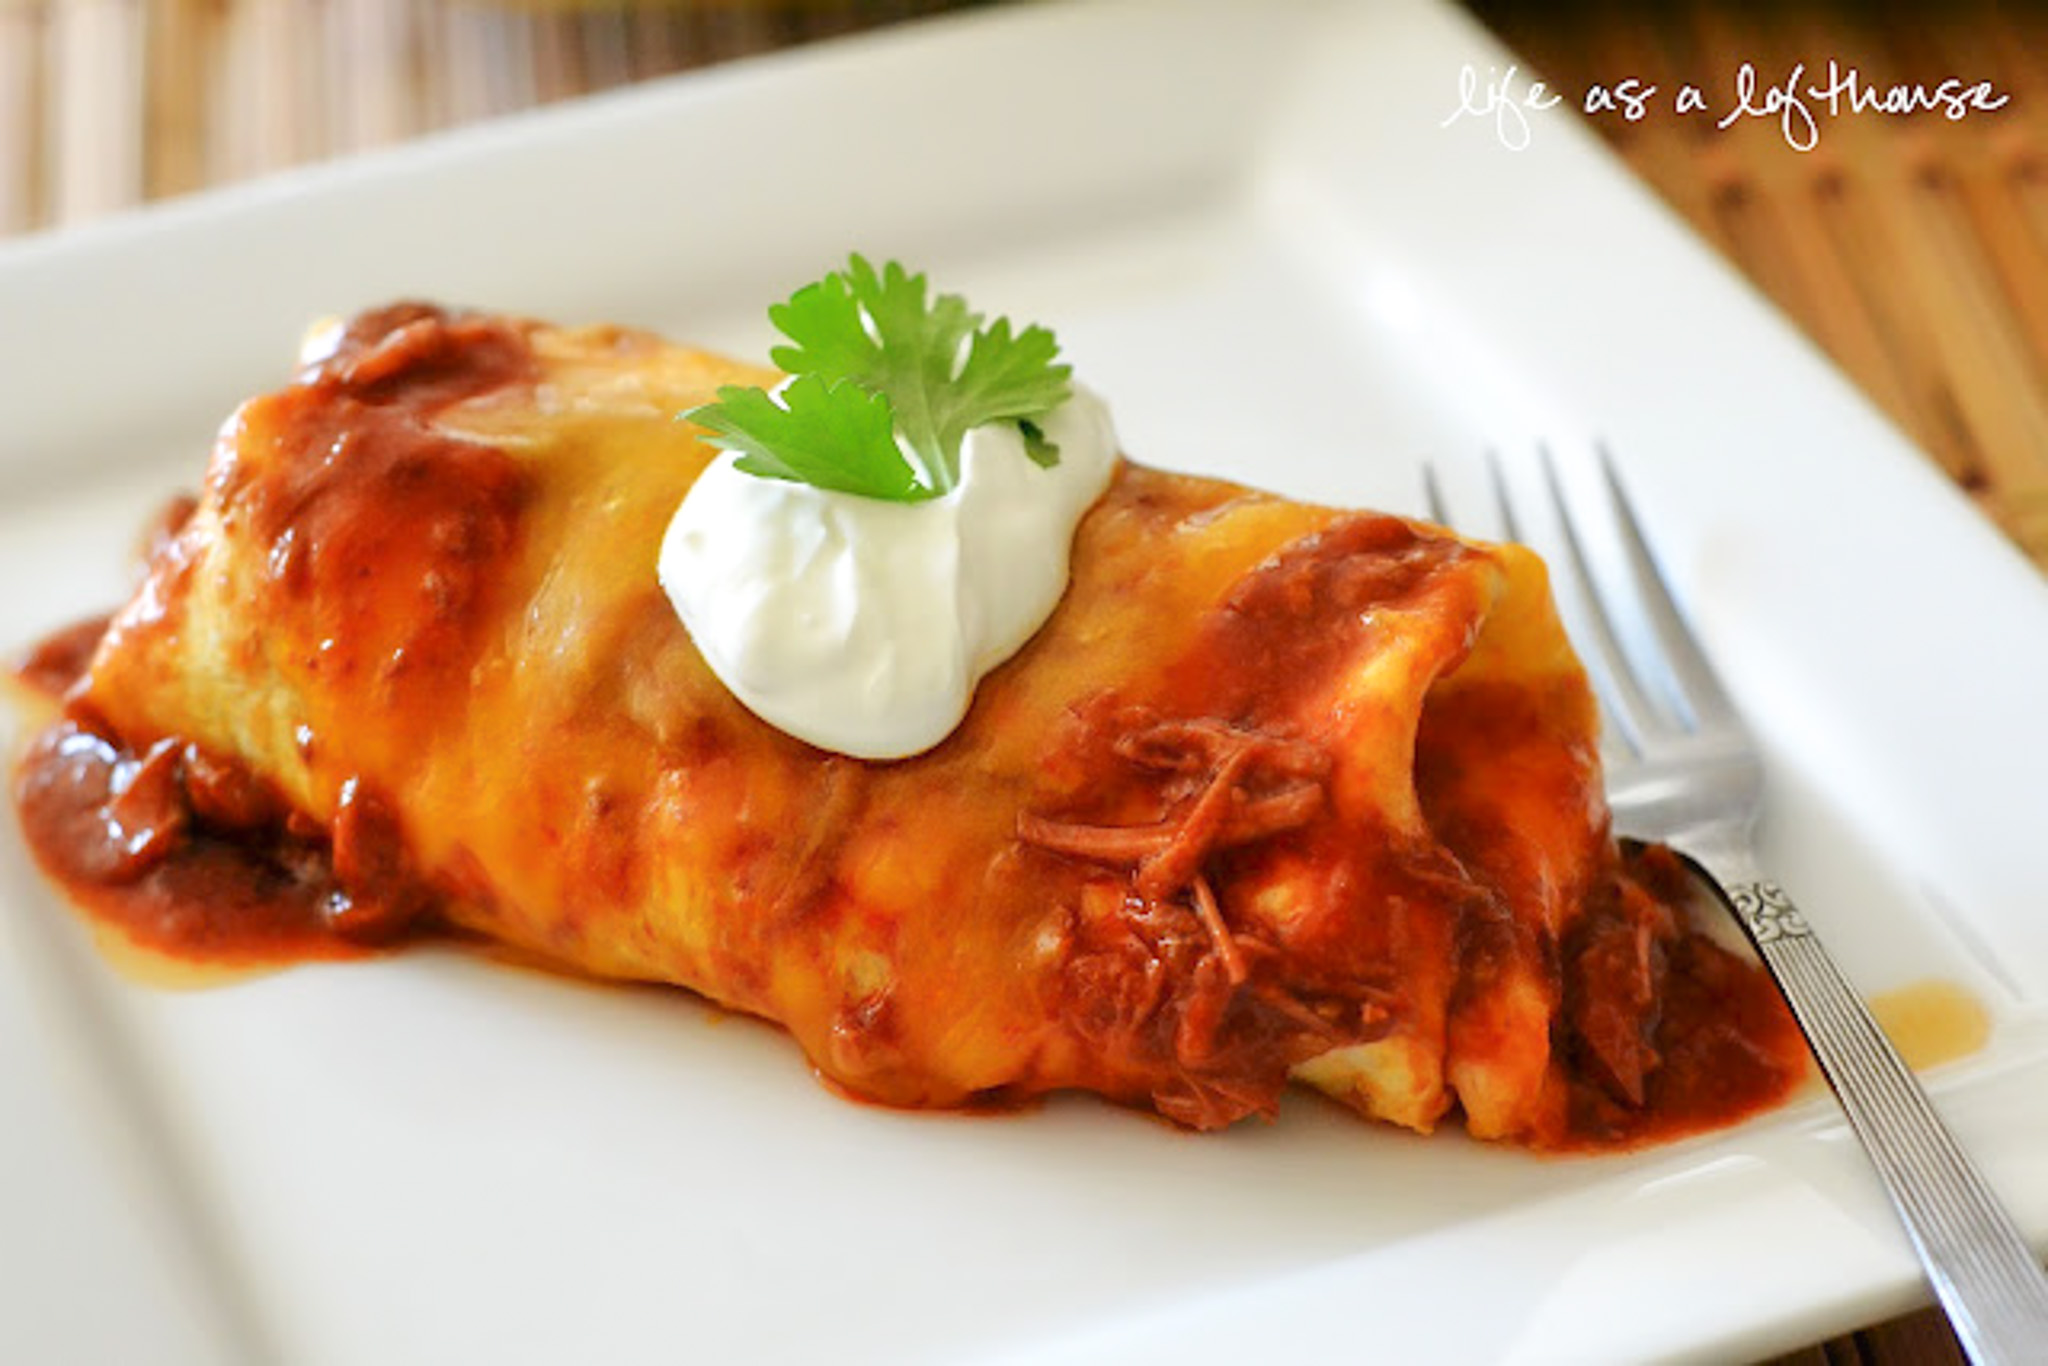 Chile Colorado Burritos are the most incredible and flavorful beef burritos you'll ever taste. The meat slow cooks in the crock pot, so you don't have to worry about it until you're ready to eat!